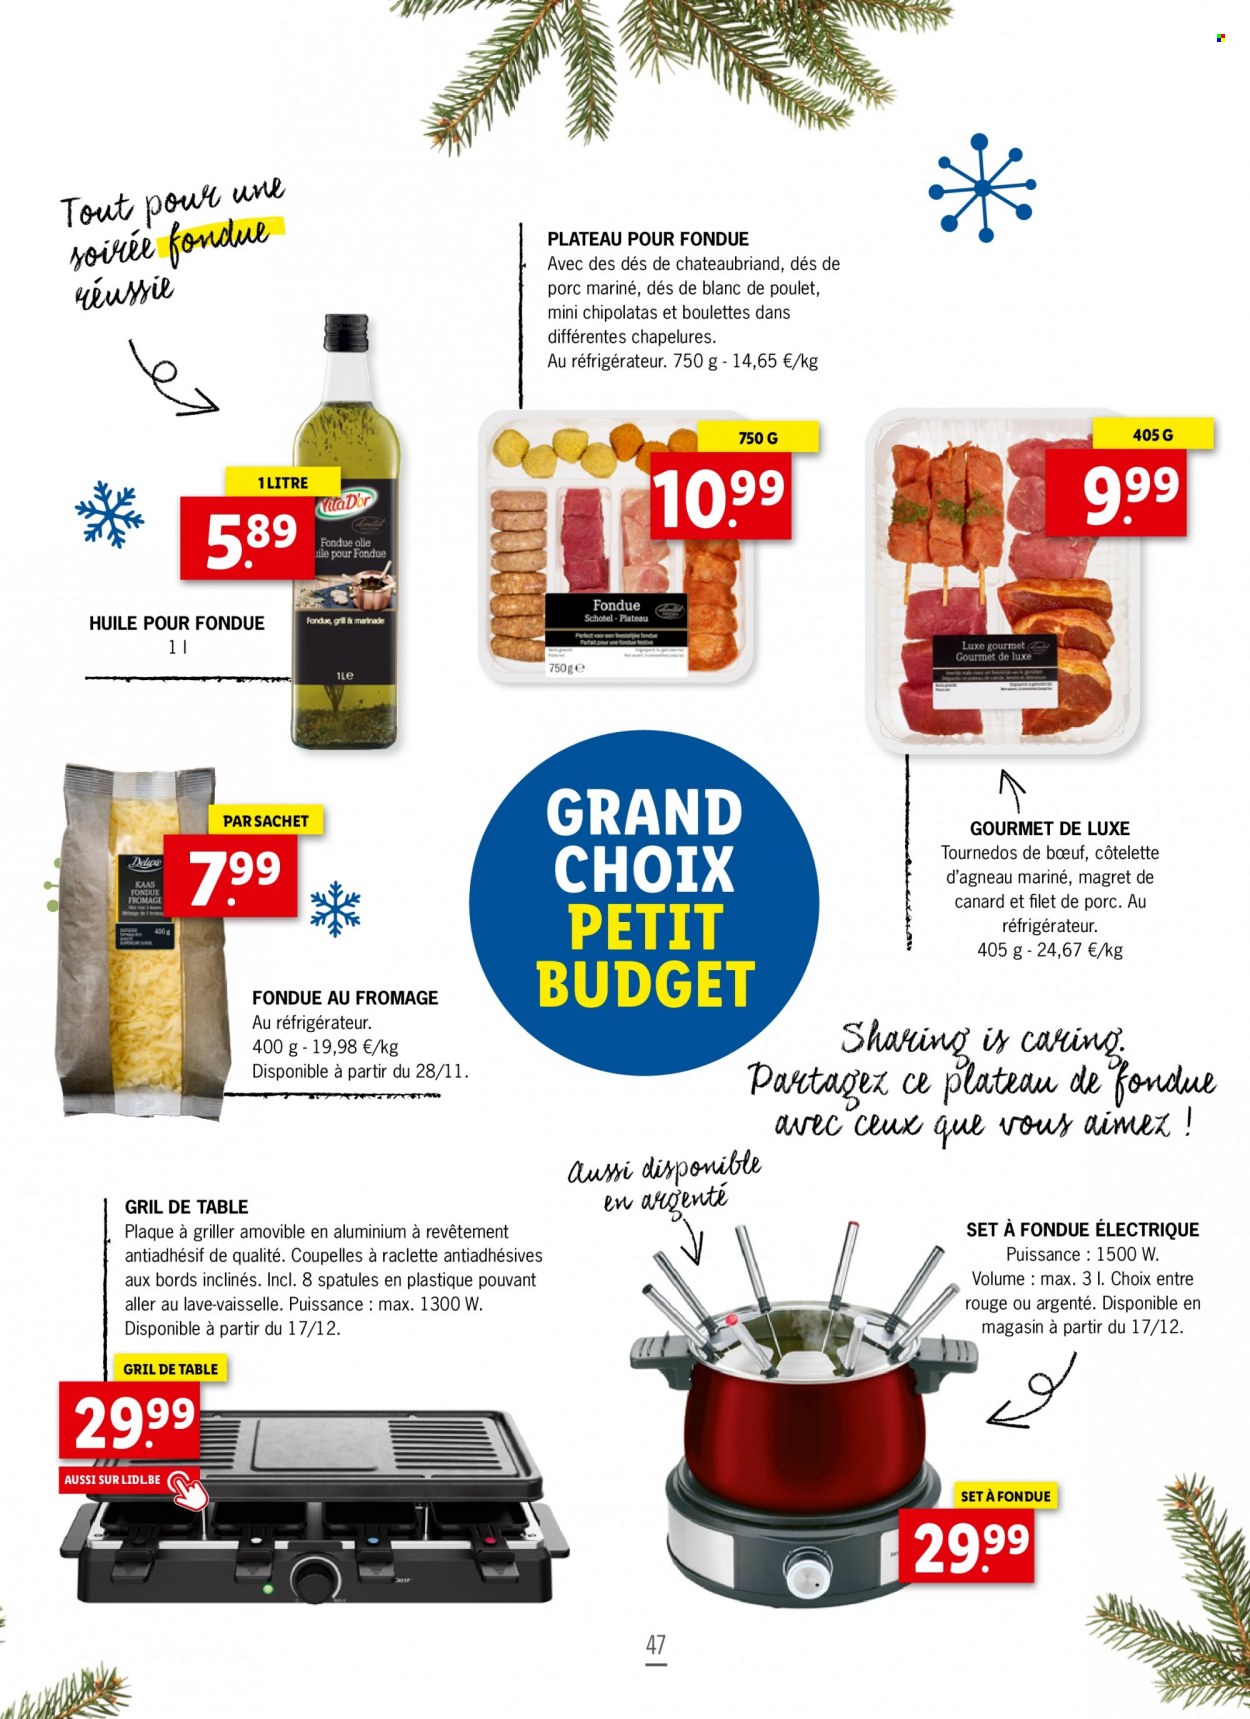 Catalogue Lidl. Page 47.